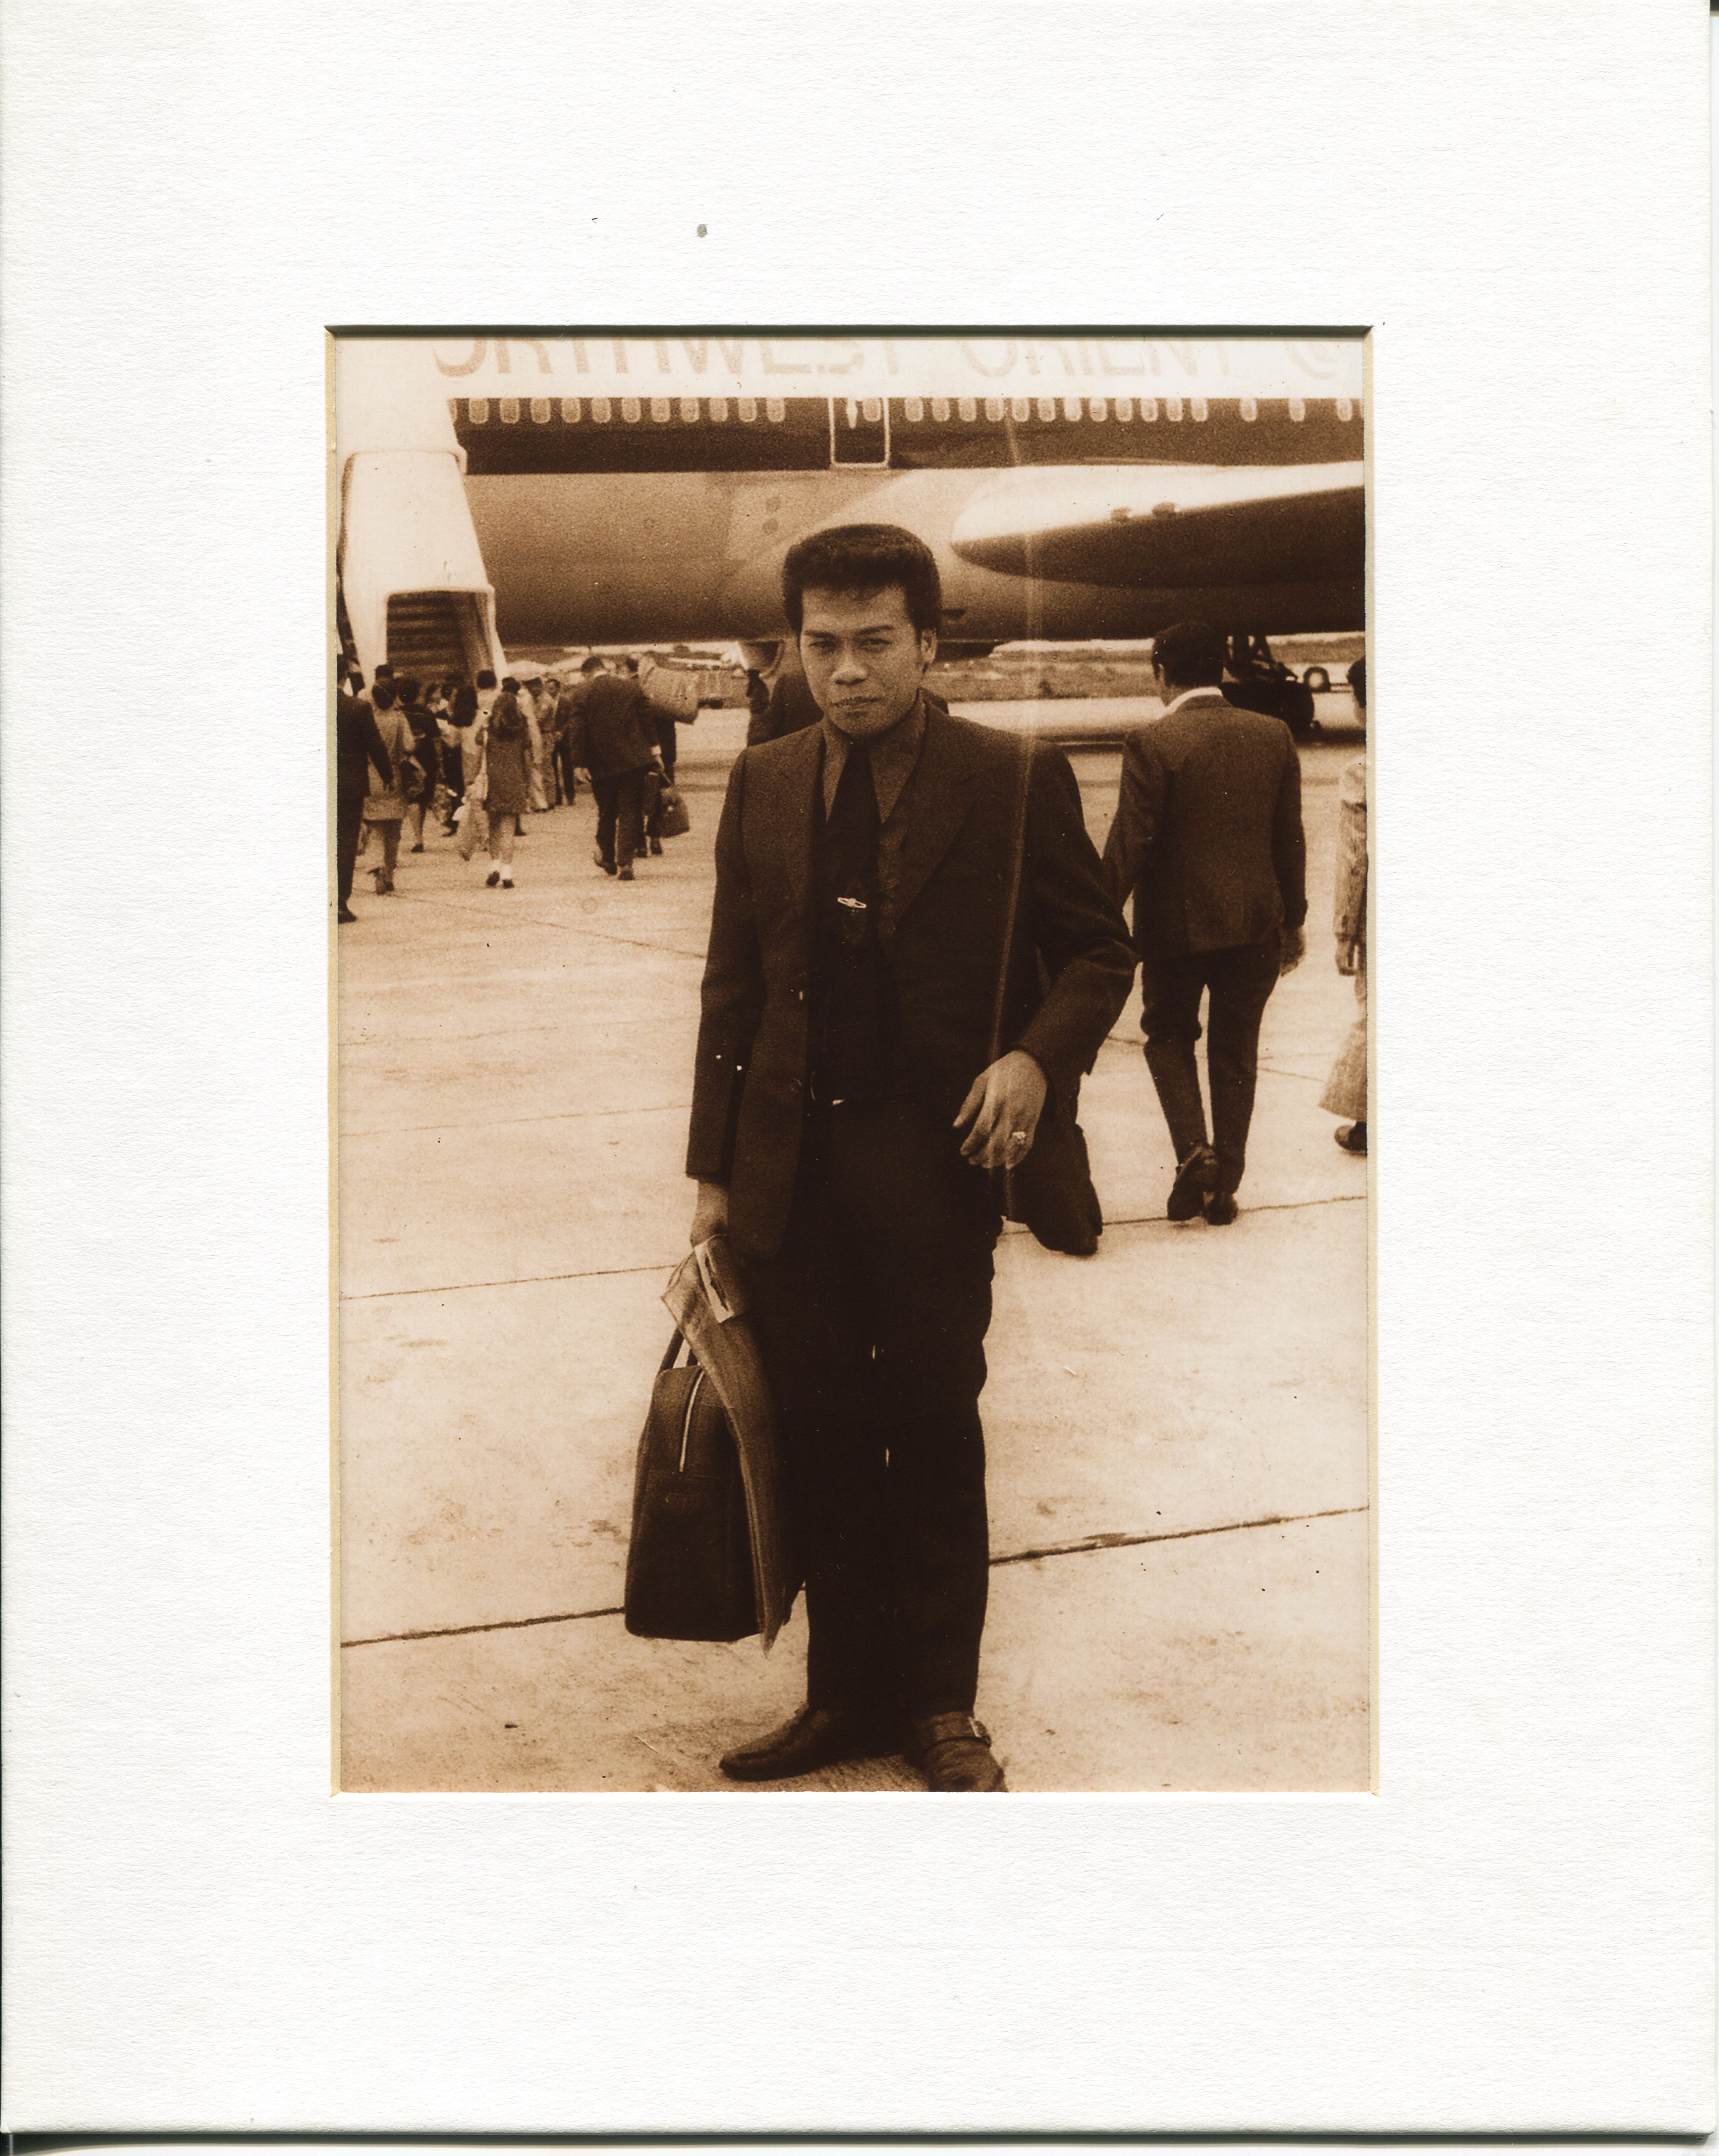 Photo of Virgilio Vergara, Vanessa Vergara's father, June 1972Vergara learned about photo in 2012 from aunt who had the photo hanging on her wall in Solano, Nueva Vizcaya. The photo was taken at the Manila airport and shows Vergara’s father leaving for the US via the Northwest Orient. Pictured: Vergara’s father (Virgilio), “alldressed to the nines”.  Vergara’s paternal grandfather was a tailor at his shop, called Philippines Bazaar, therefore her father had a strong fashion sense. Vergara’s father is wearing a tie and coat and has a small piece of hand-carry luggage (containing his paperworkfor emigration- all he brought with him.) He has a flat top haircut which was “in vogue at the time.” She said he has a nice smile and looks confident but a bit uneasy.  In 1972, Vergara’s father was the oldest of six and as such had a responsibility to help hisfamily. Vergara said he emigrated for financial opportunities. Vergara’s father planned to enter the US at Port of Maine but, at the last minute, it was changed to Chicago. There, Vergara’s father met his future boss and future father-in-law. In 1970, Vergara’s motherwas petitioned by her father, who was Virgilio’s boss. Vergara said she is very proud of how her father worked hard to come to the USA and encouraged his children to get the best education. Vergara wants to keep stories alive as was as heritage. Any views, findings, conclusions, or recommendations expressed in this story do not necessarily represent those of the National Endowment for the Humanities. (c) Field Museum of Natural History - CC BY-NC 4.0